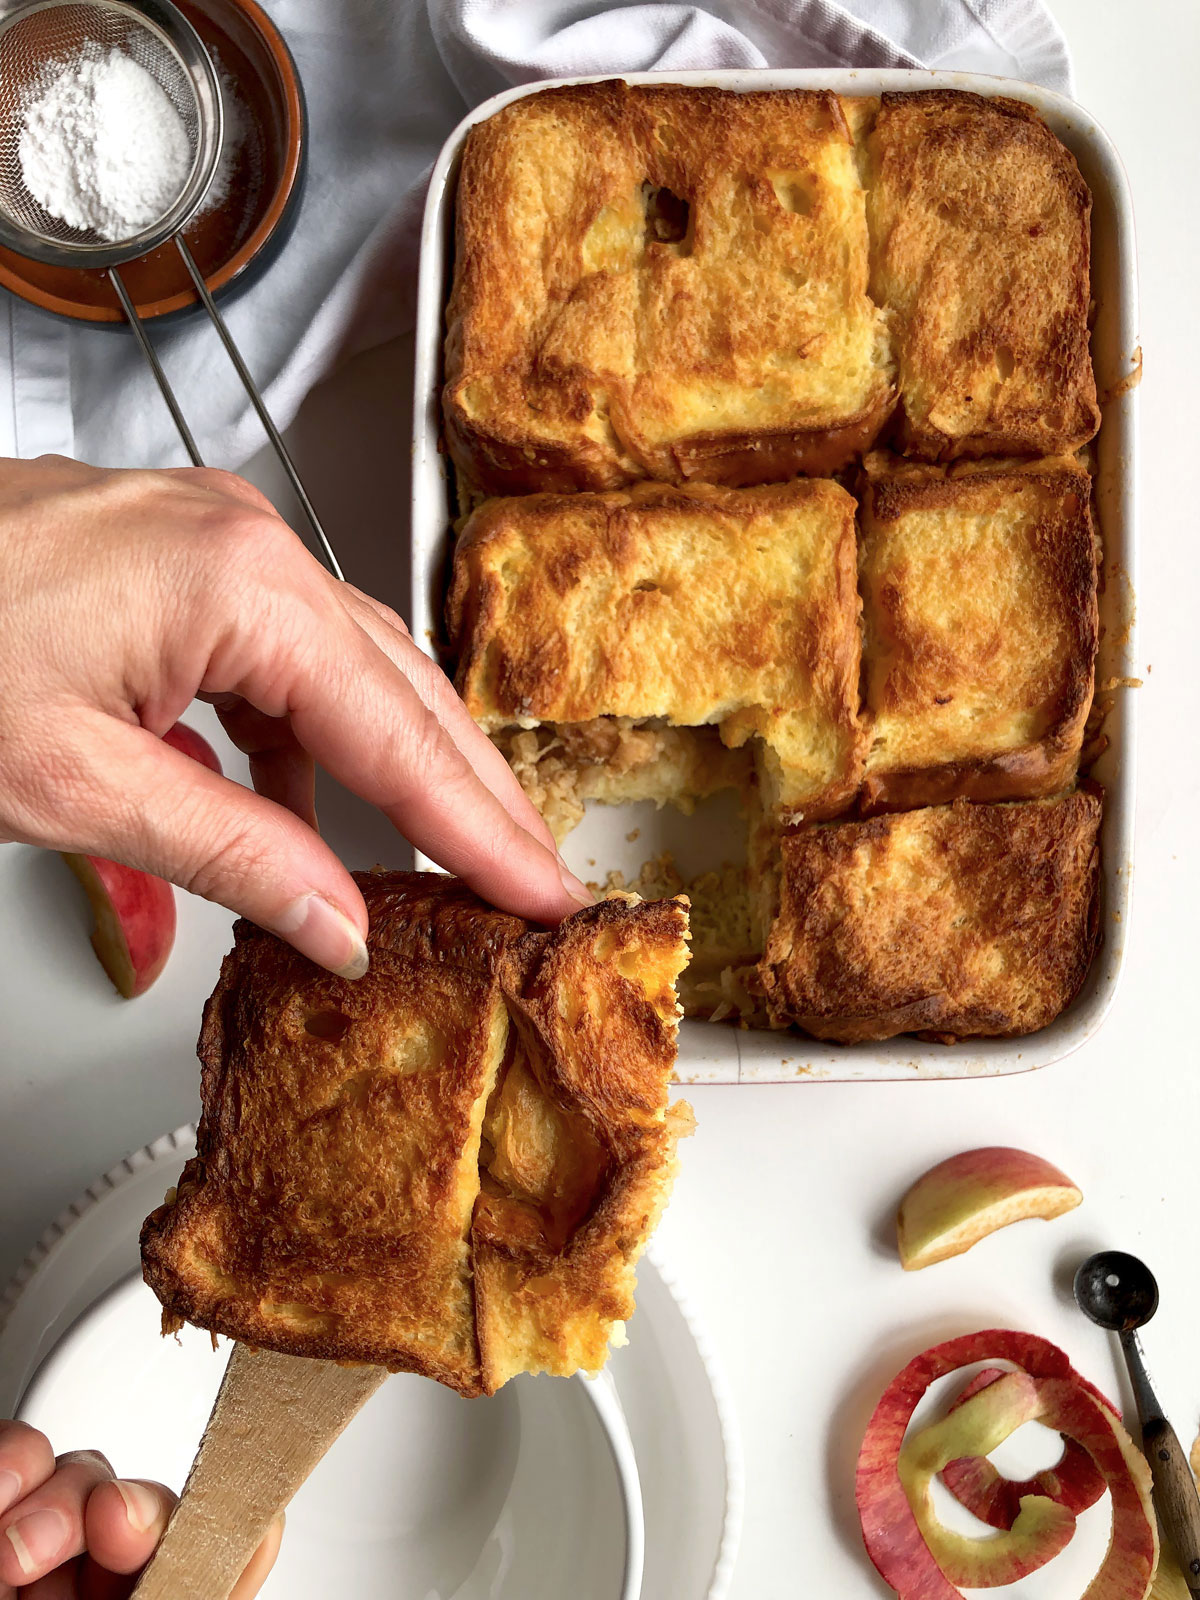 Brad and butter pudding with apples.